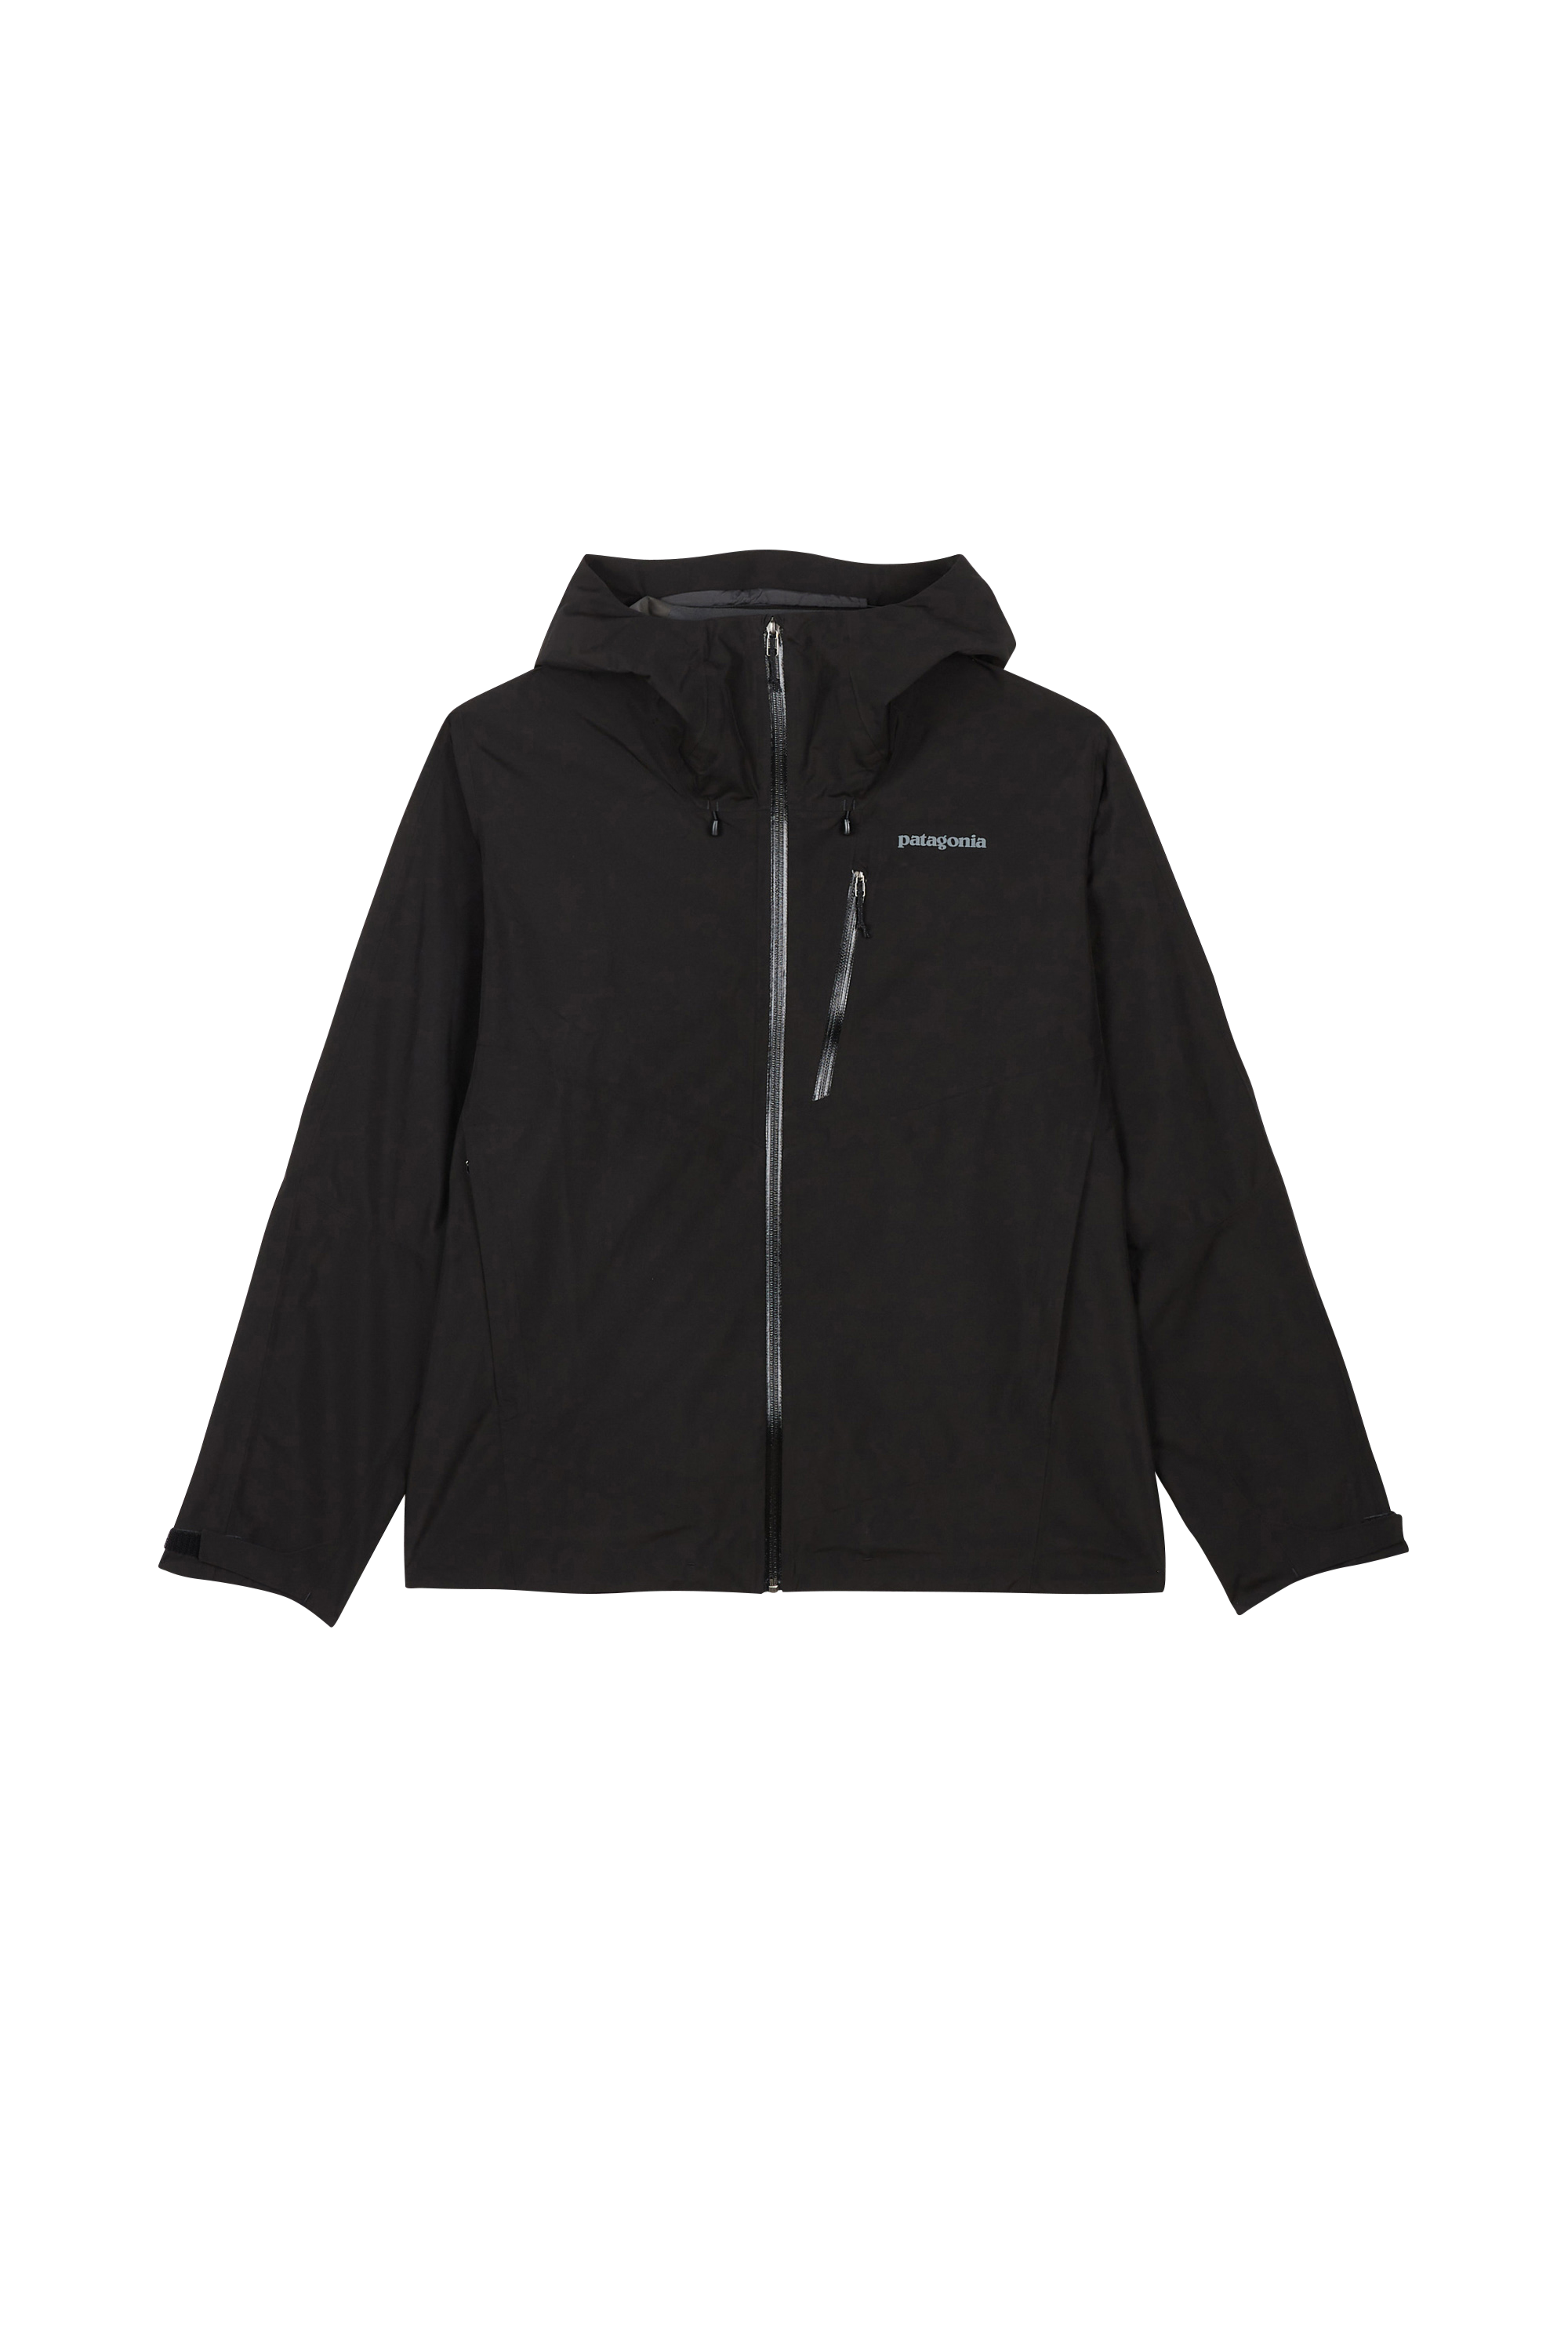 Patagonia - Coupe-vent - Taille XL